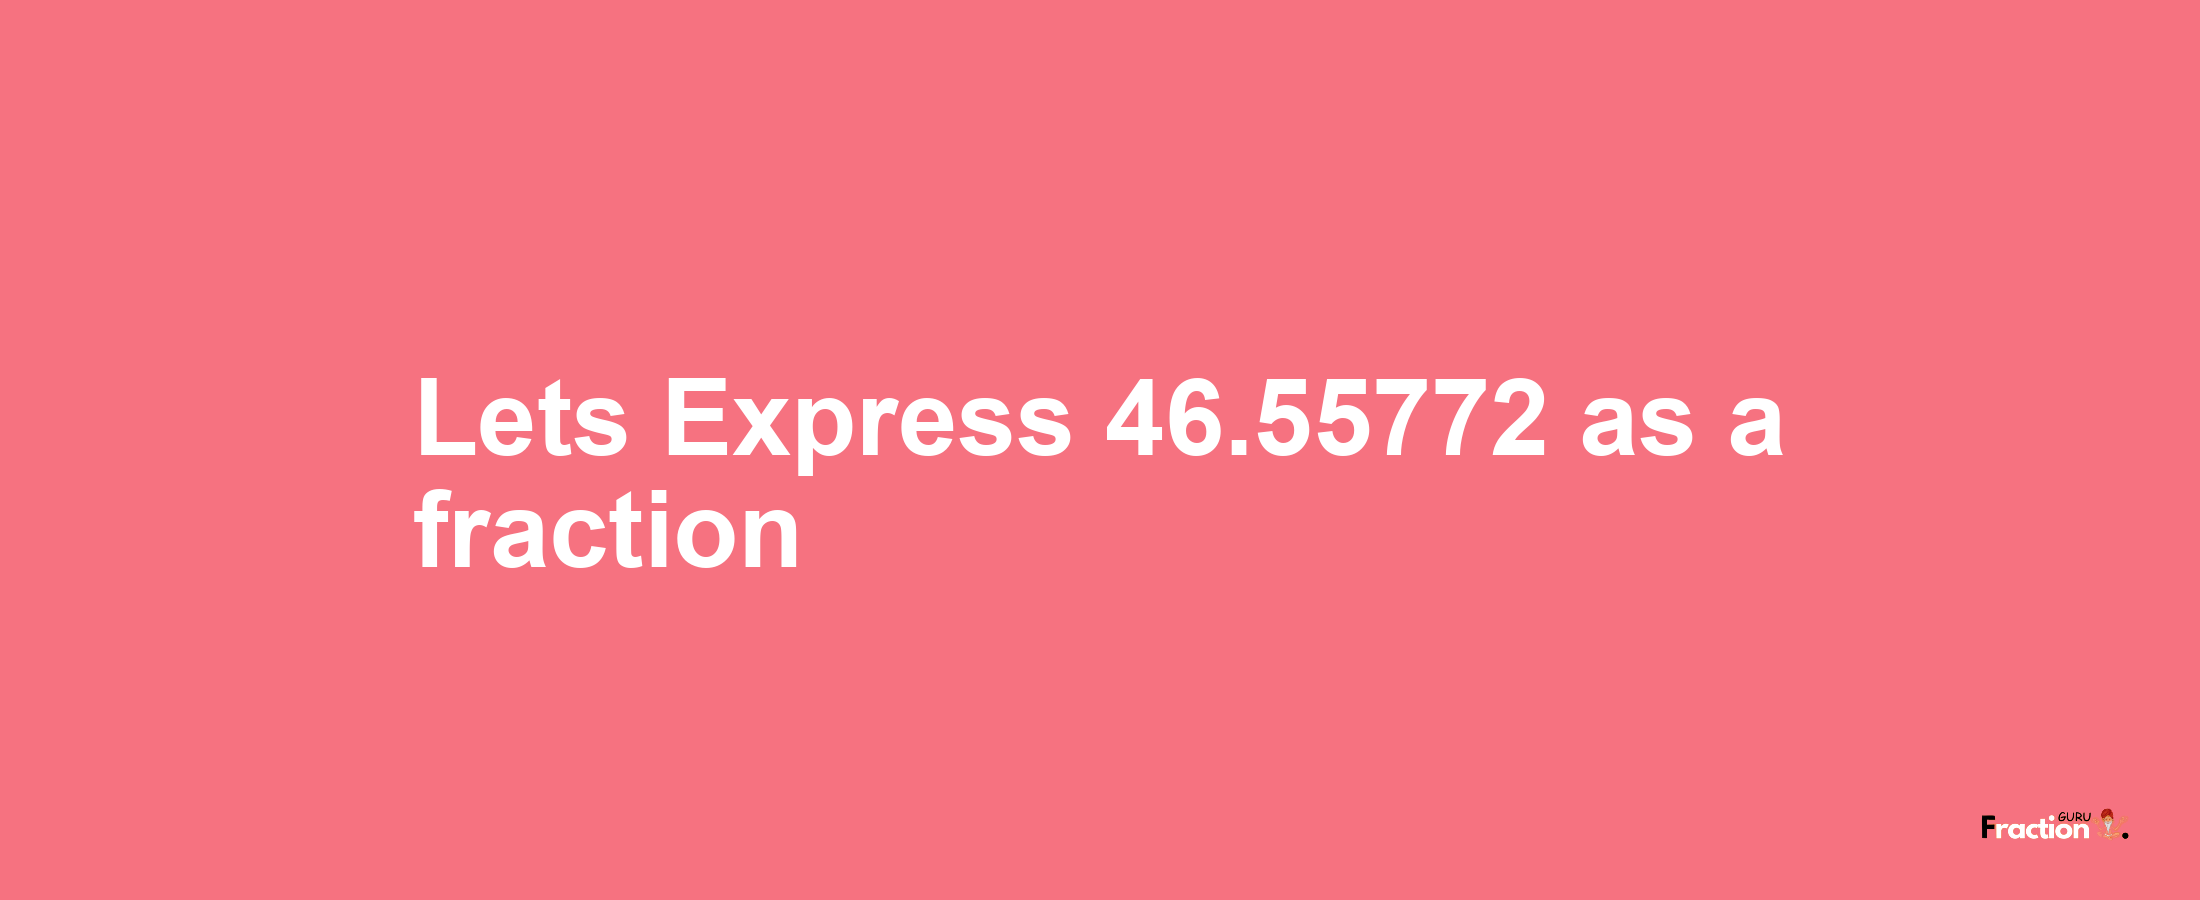 Lets Express 46.55772 as afraction